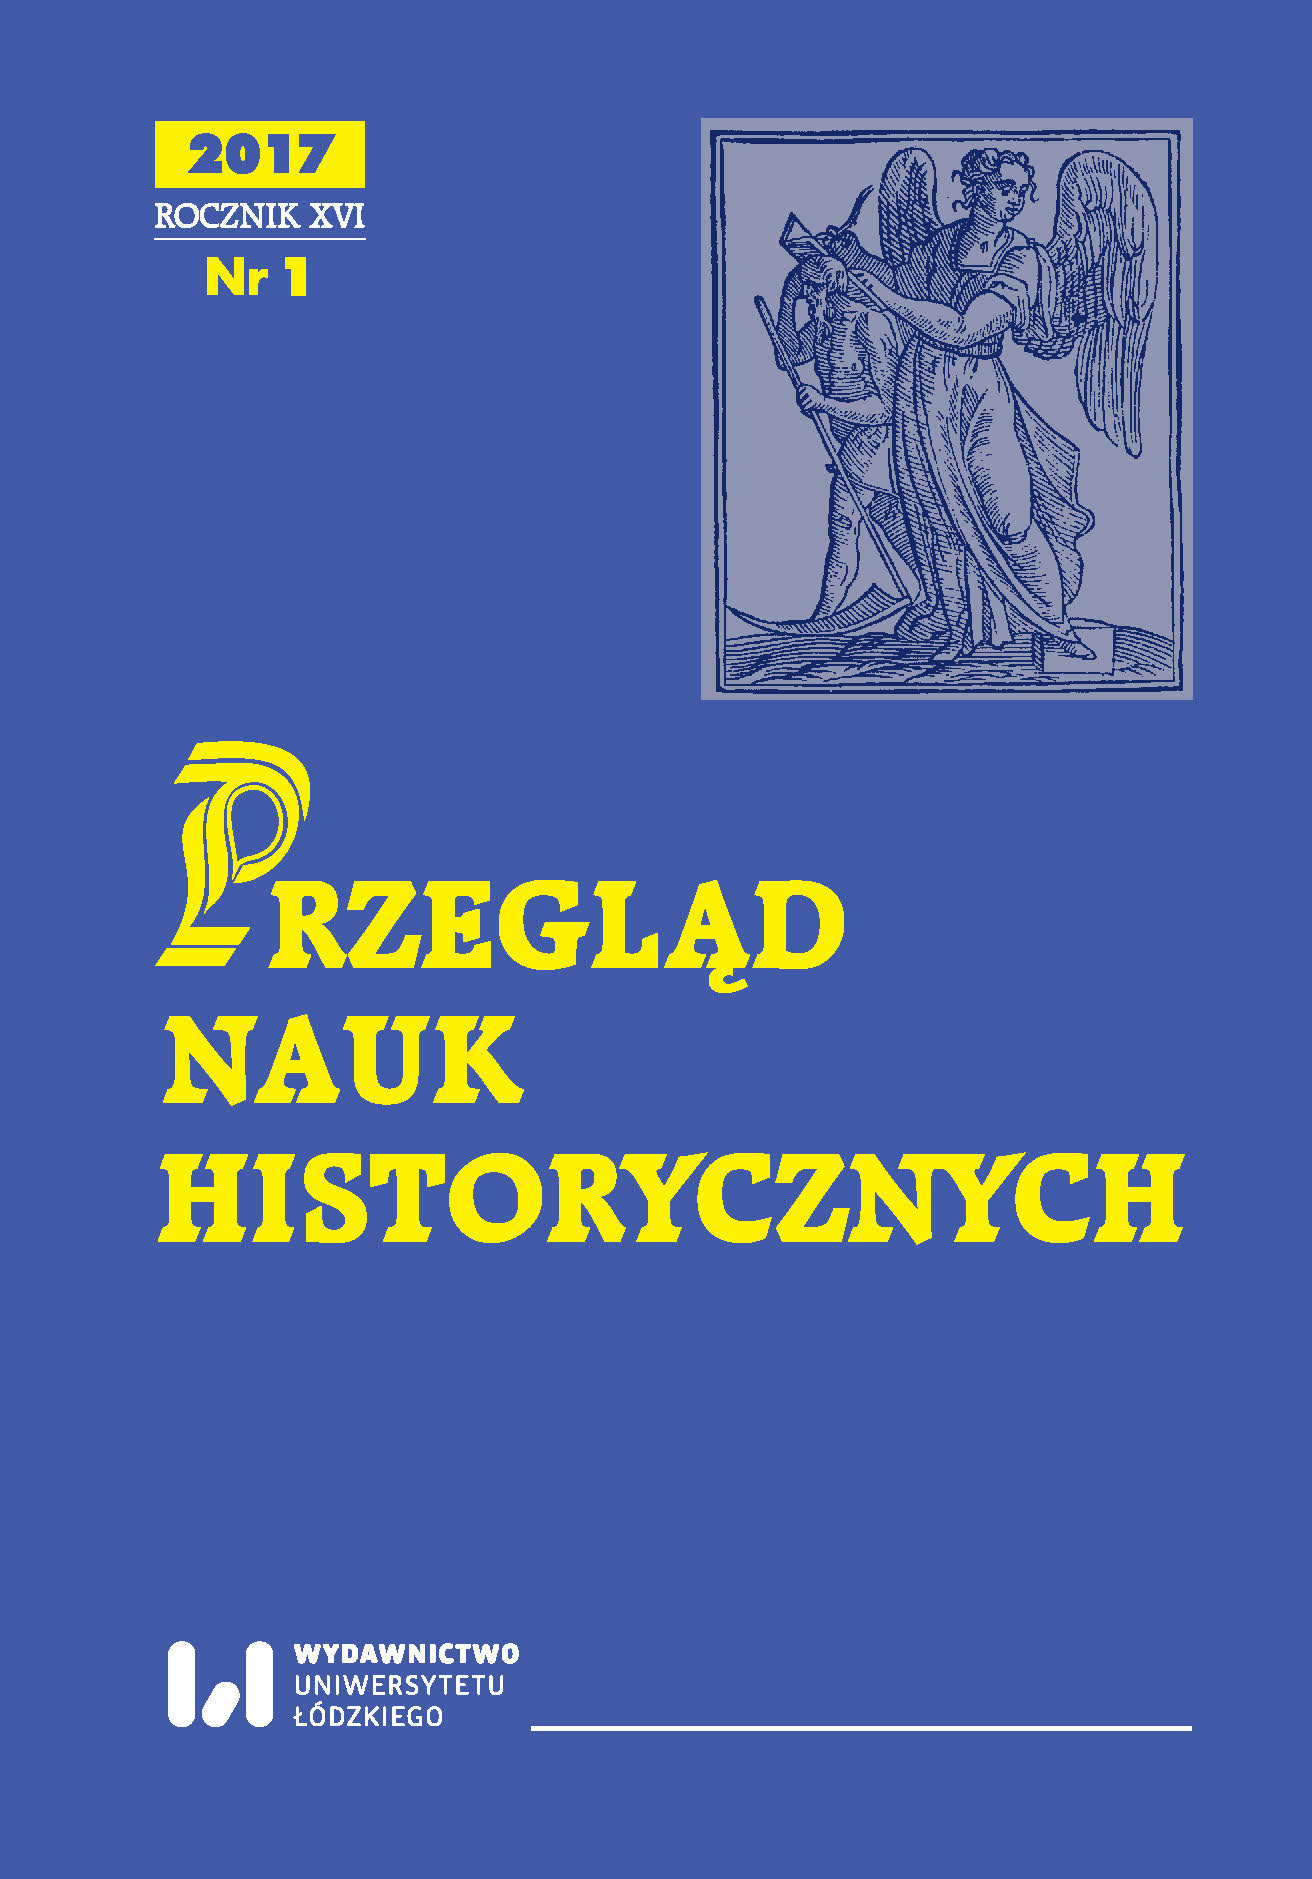 Fine arts in the city of Łódź at the end of the 19th and at beginning of the 20th centuries Cover Image